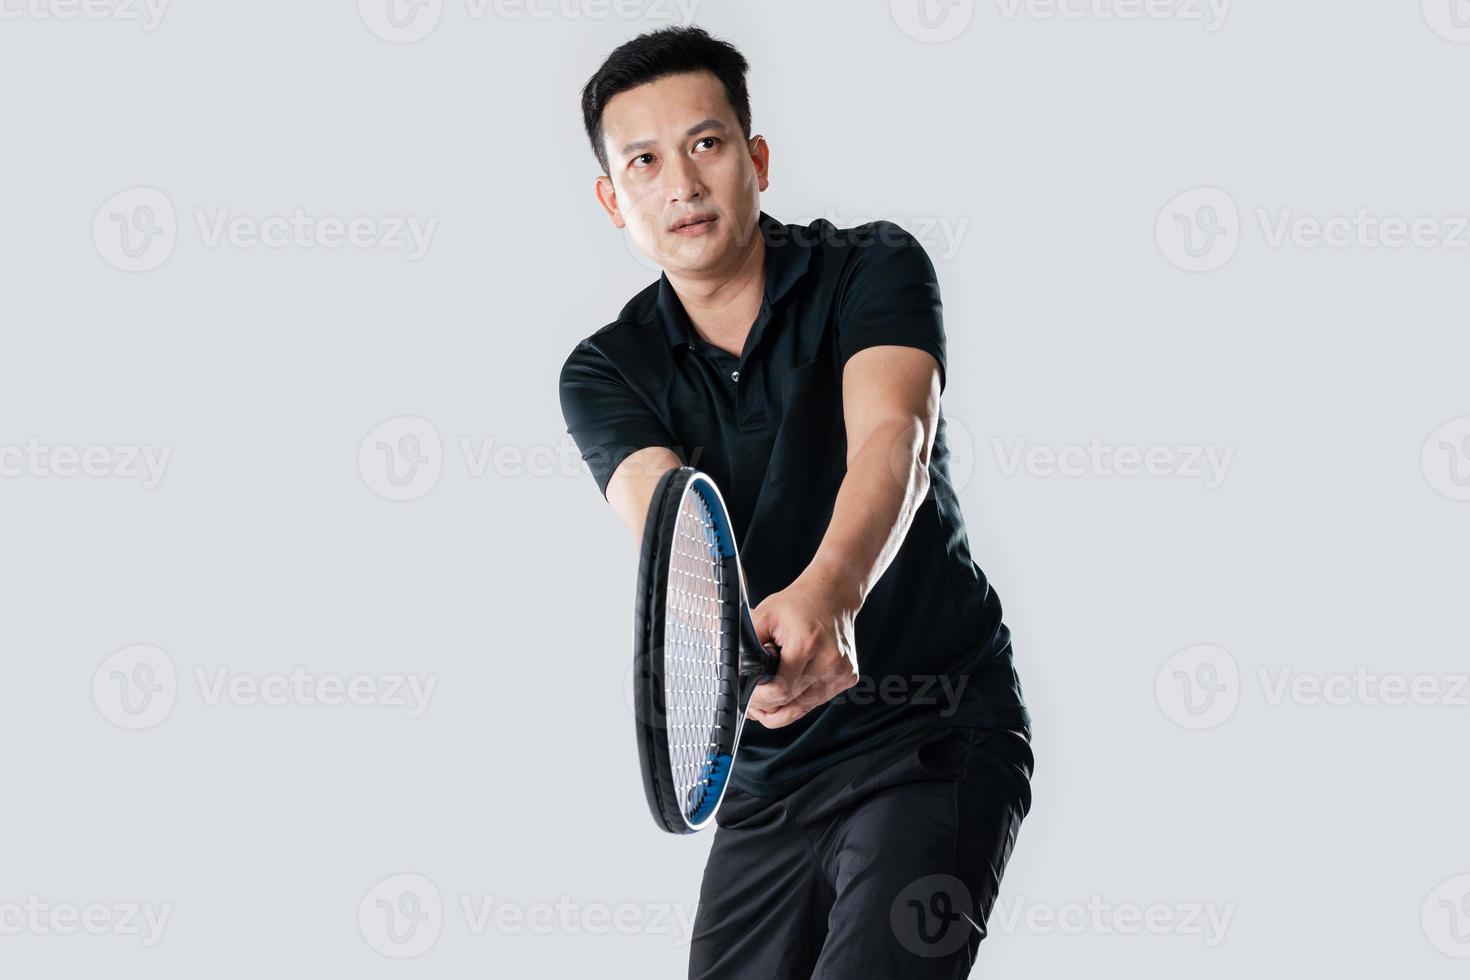 Male tennis player playing tennis with striving for victory gesture. photo